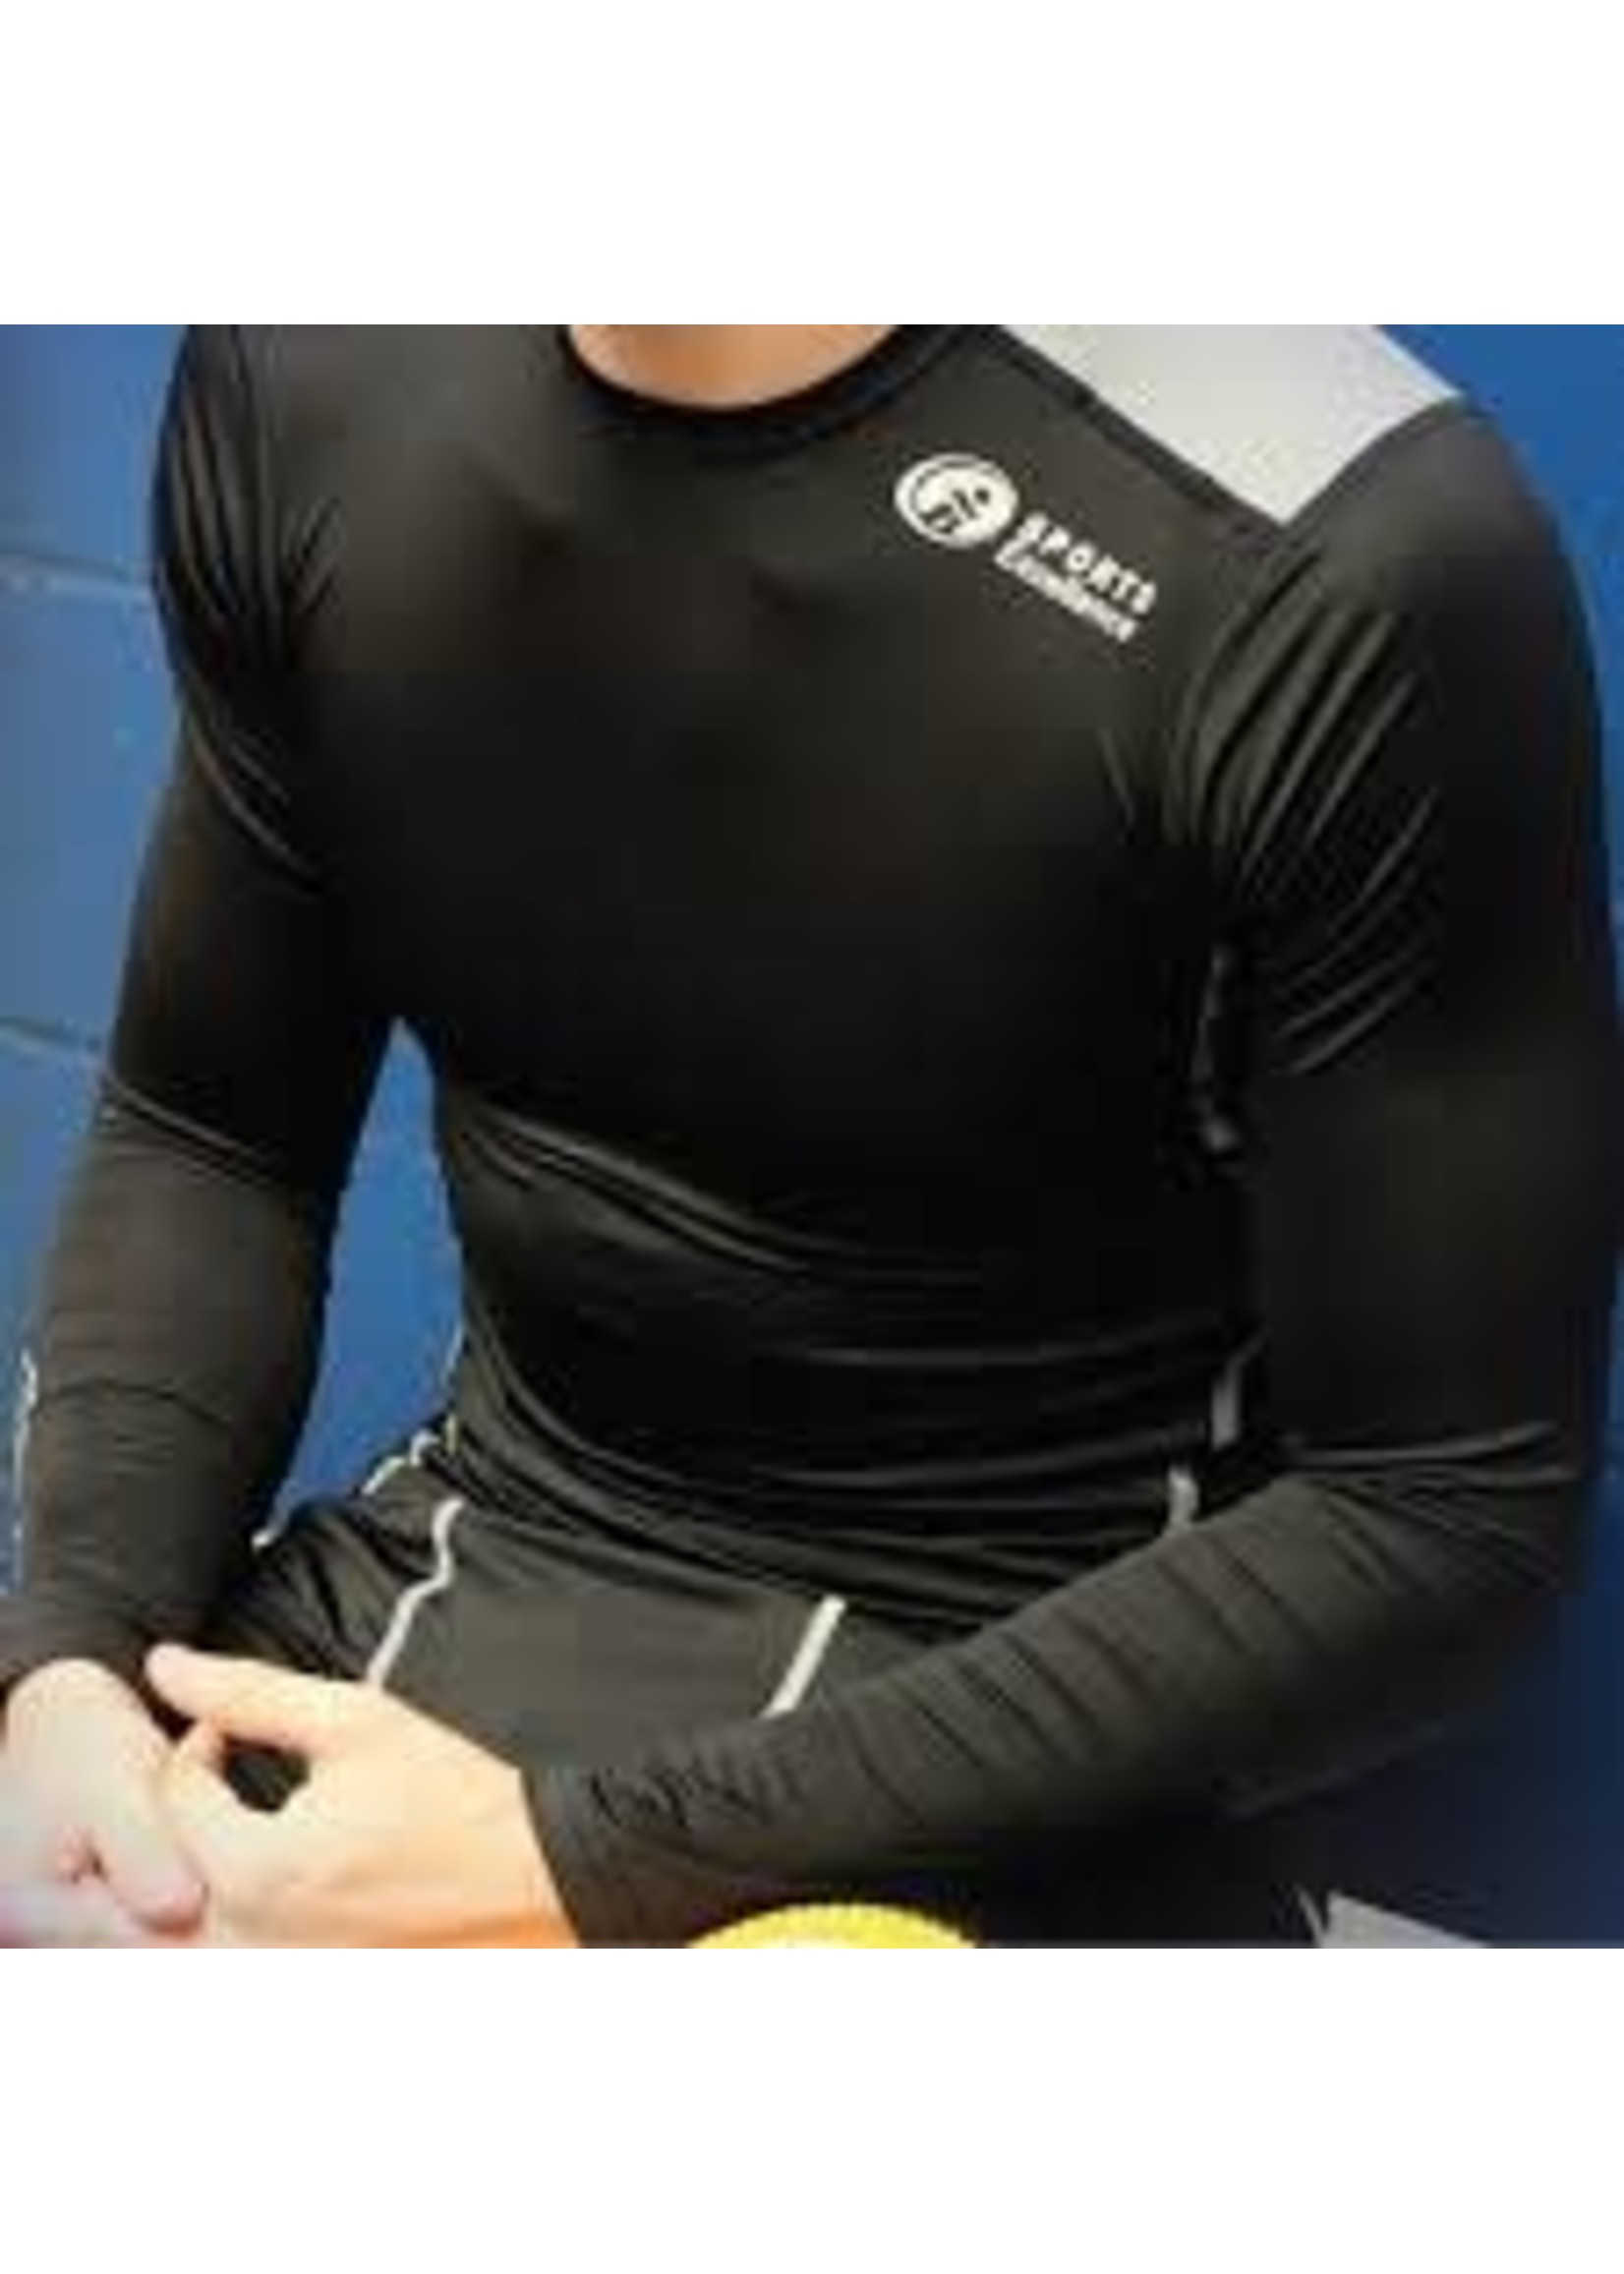 SPORT EXCELLENCE SPORTS EXCELLENCE COMPRESSION SHIRT SR